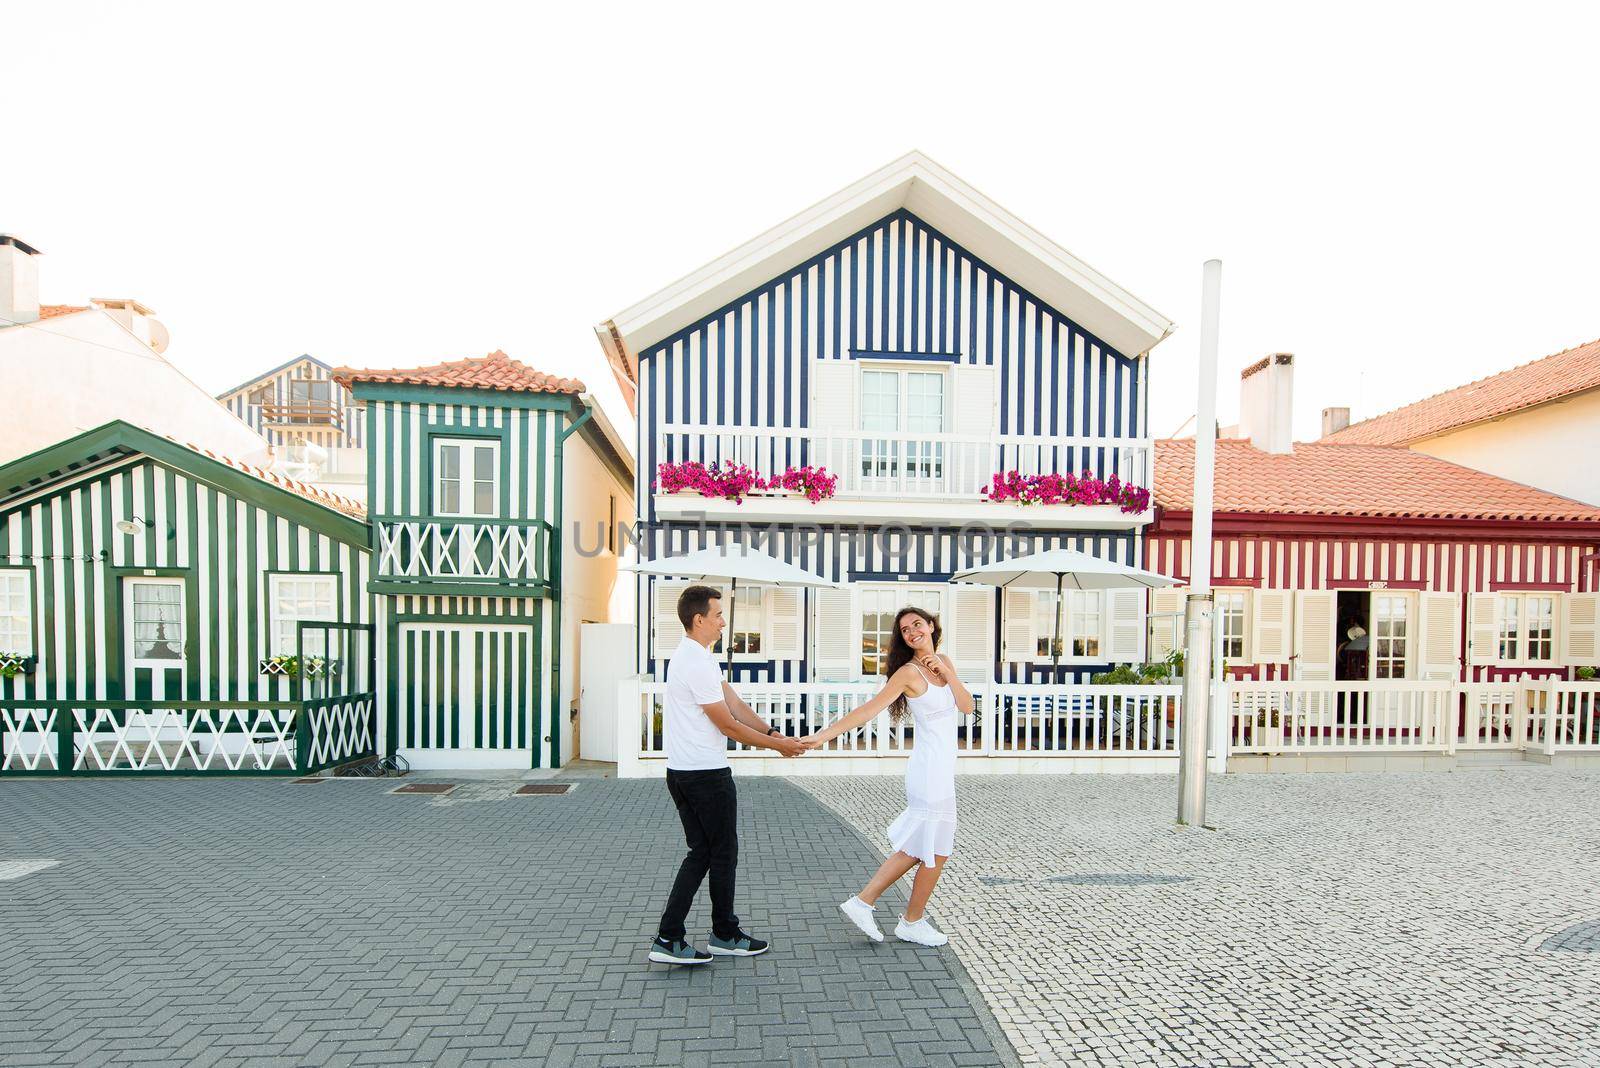 Young couple in white clothes walks around street in Aveiro, Portugal near colourful and peaceful houses. Lifestyle. Having fun, laughs, smiles